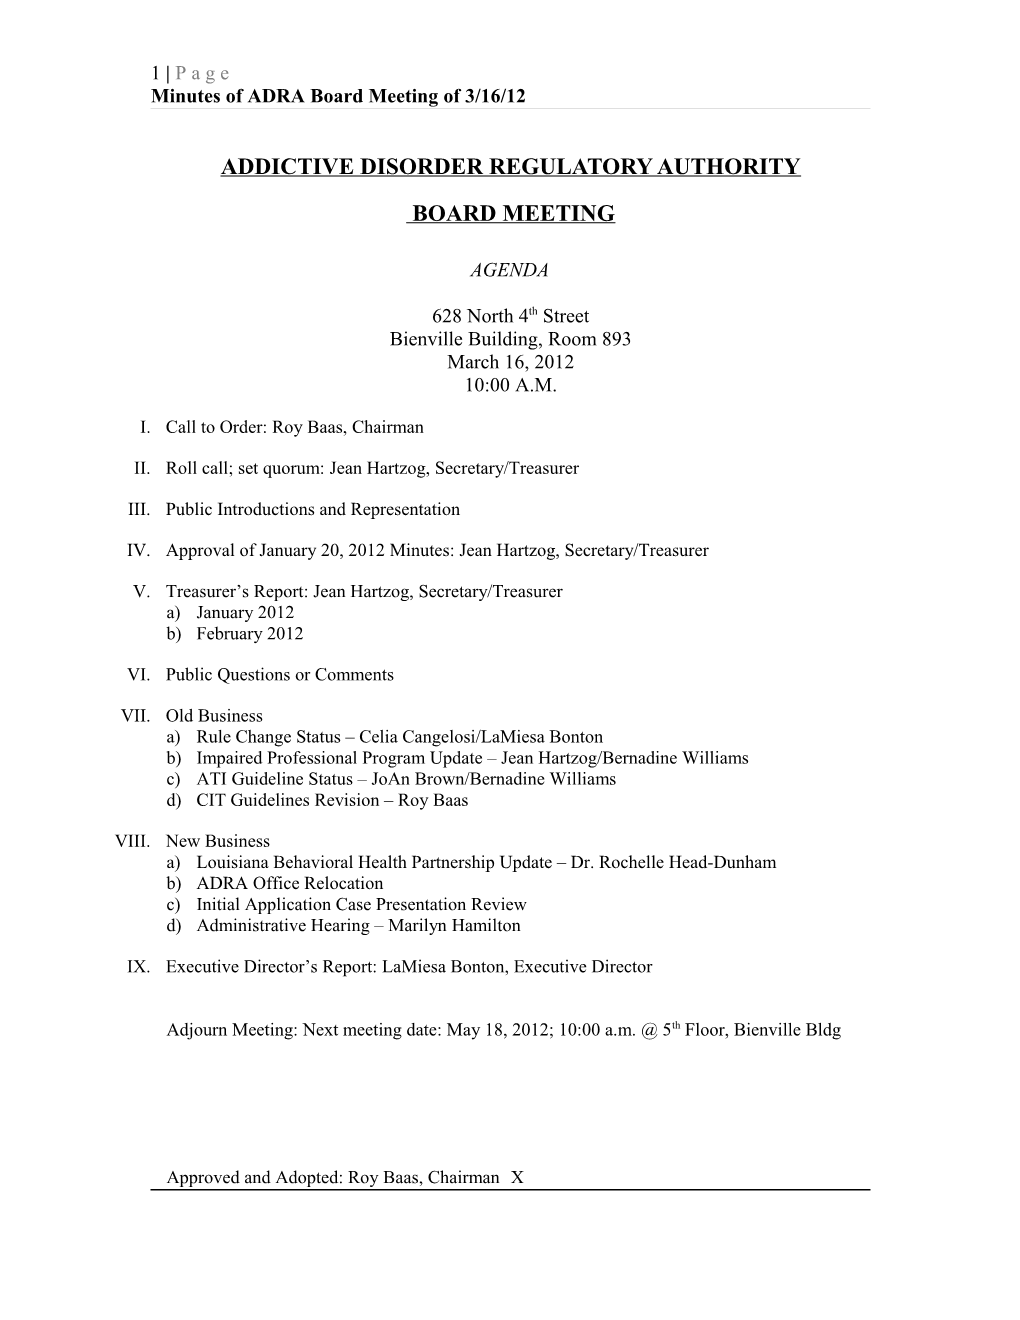 Minutes of ADRA Board Meeting of 3/16/12